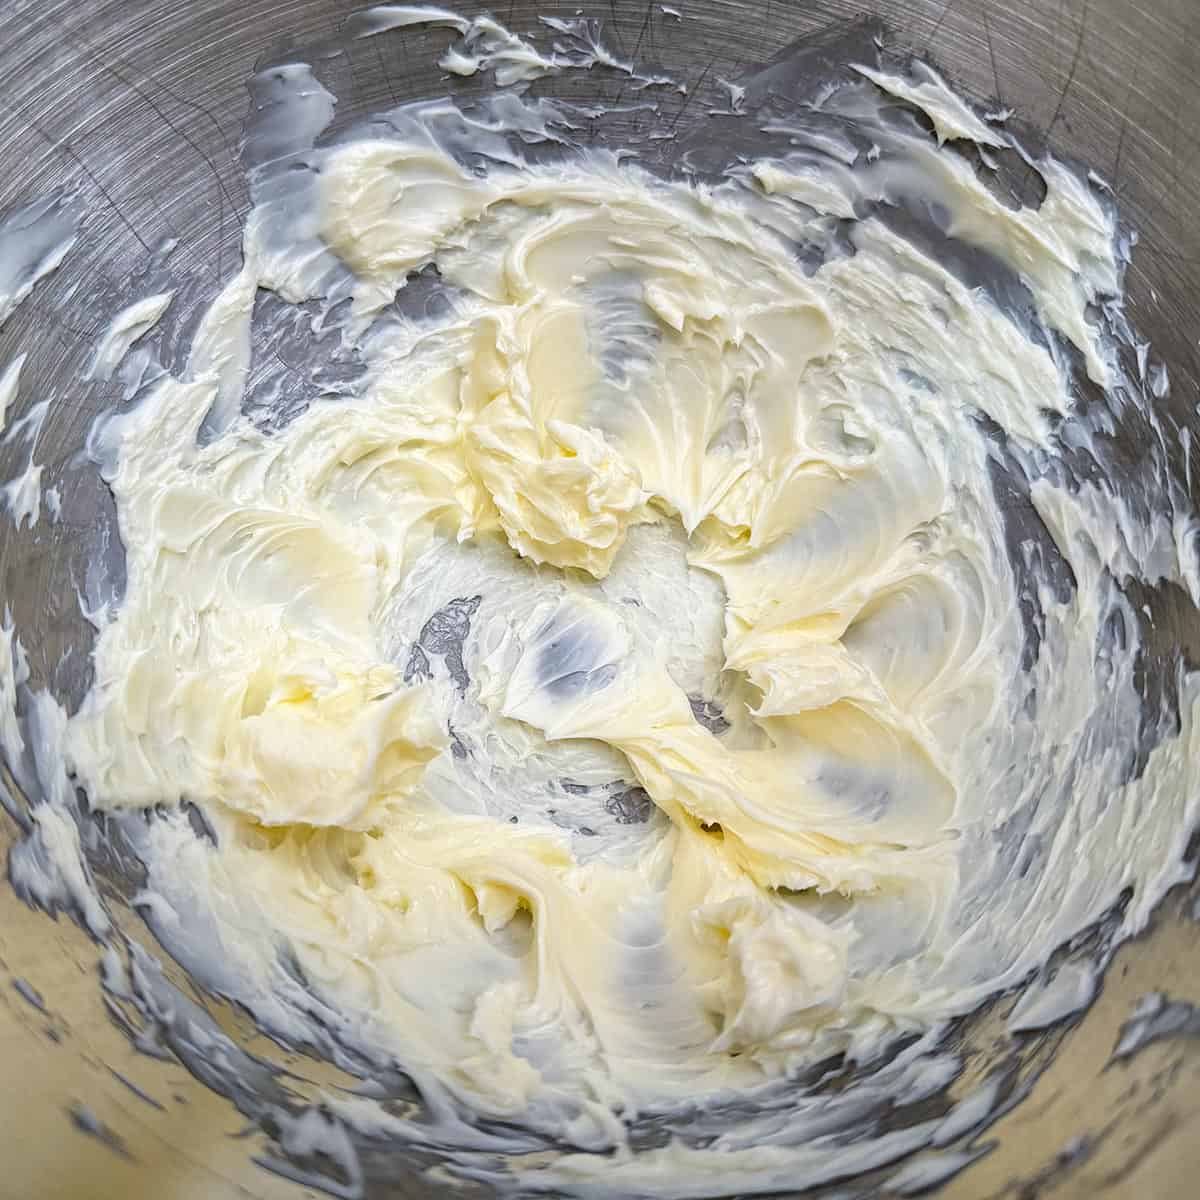 Creaming the butter in a mixer bowl for the icing.